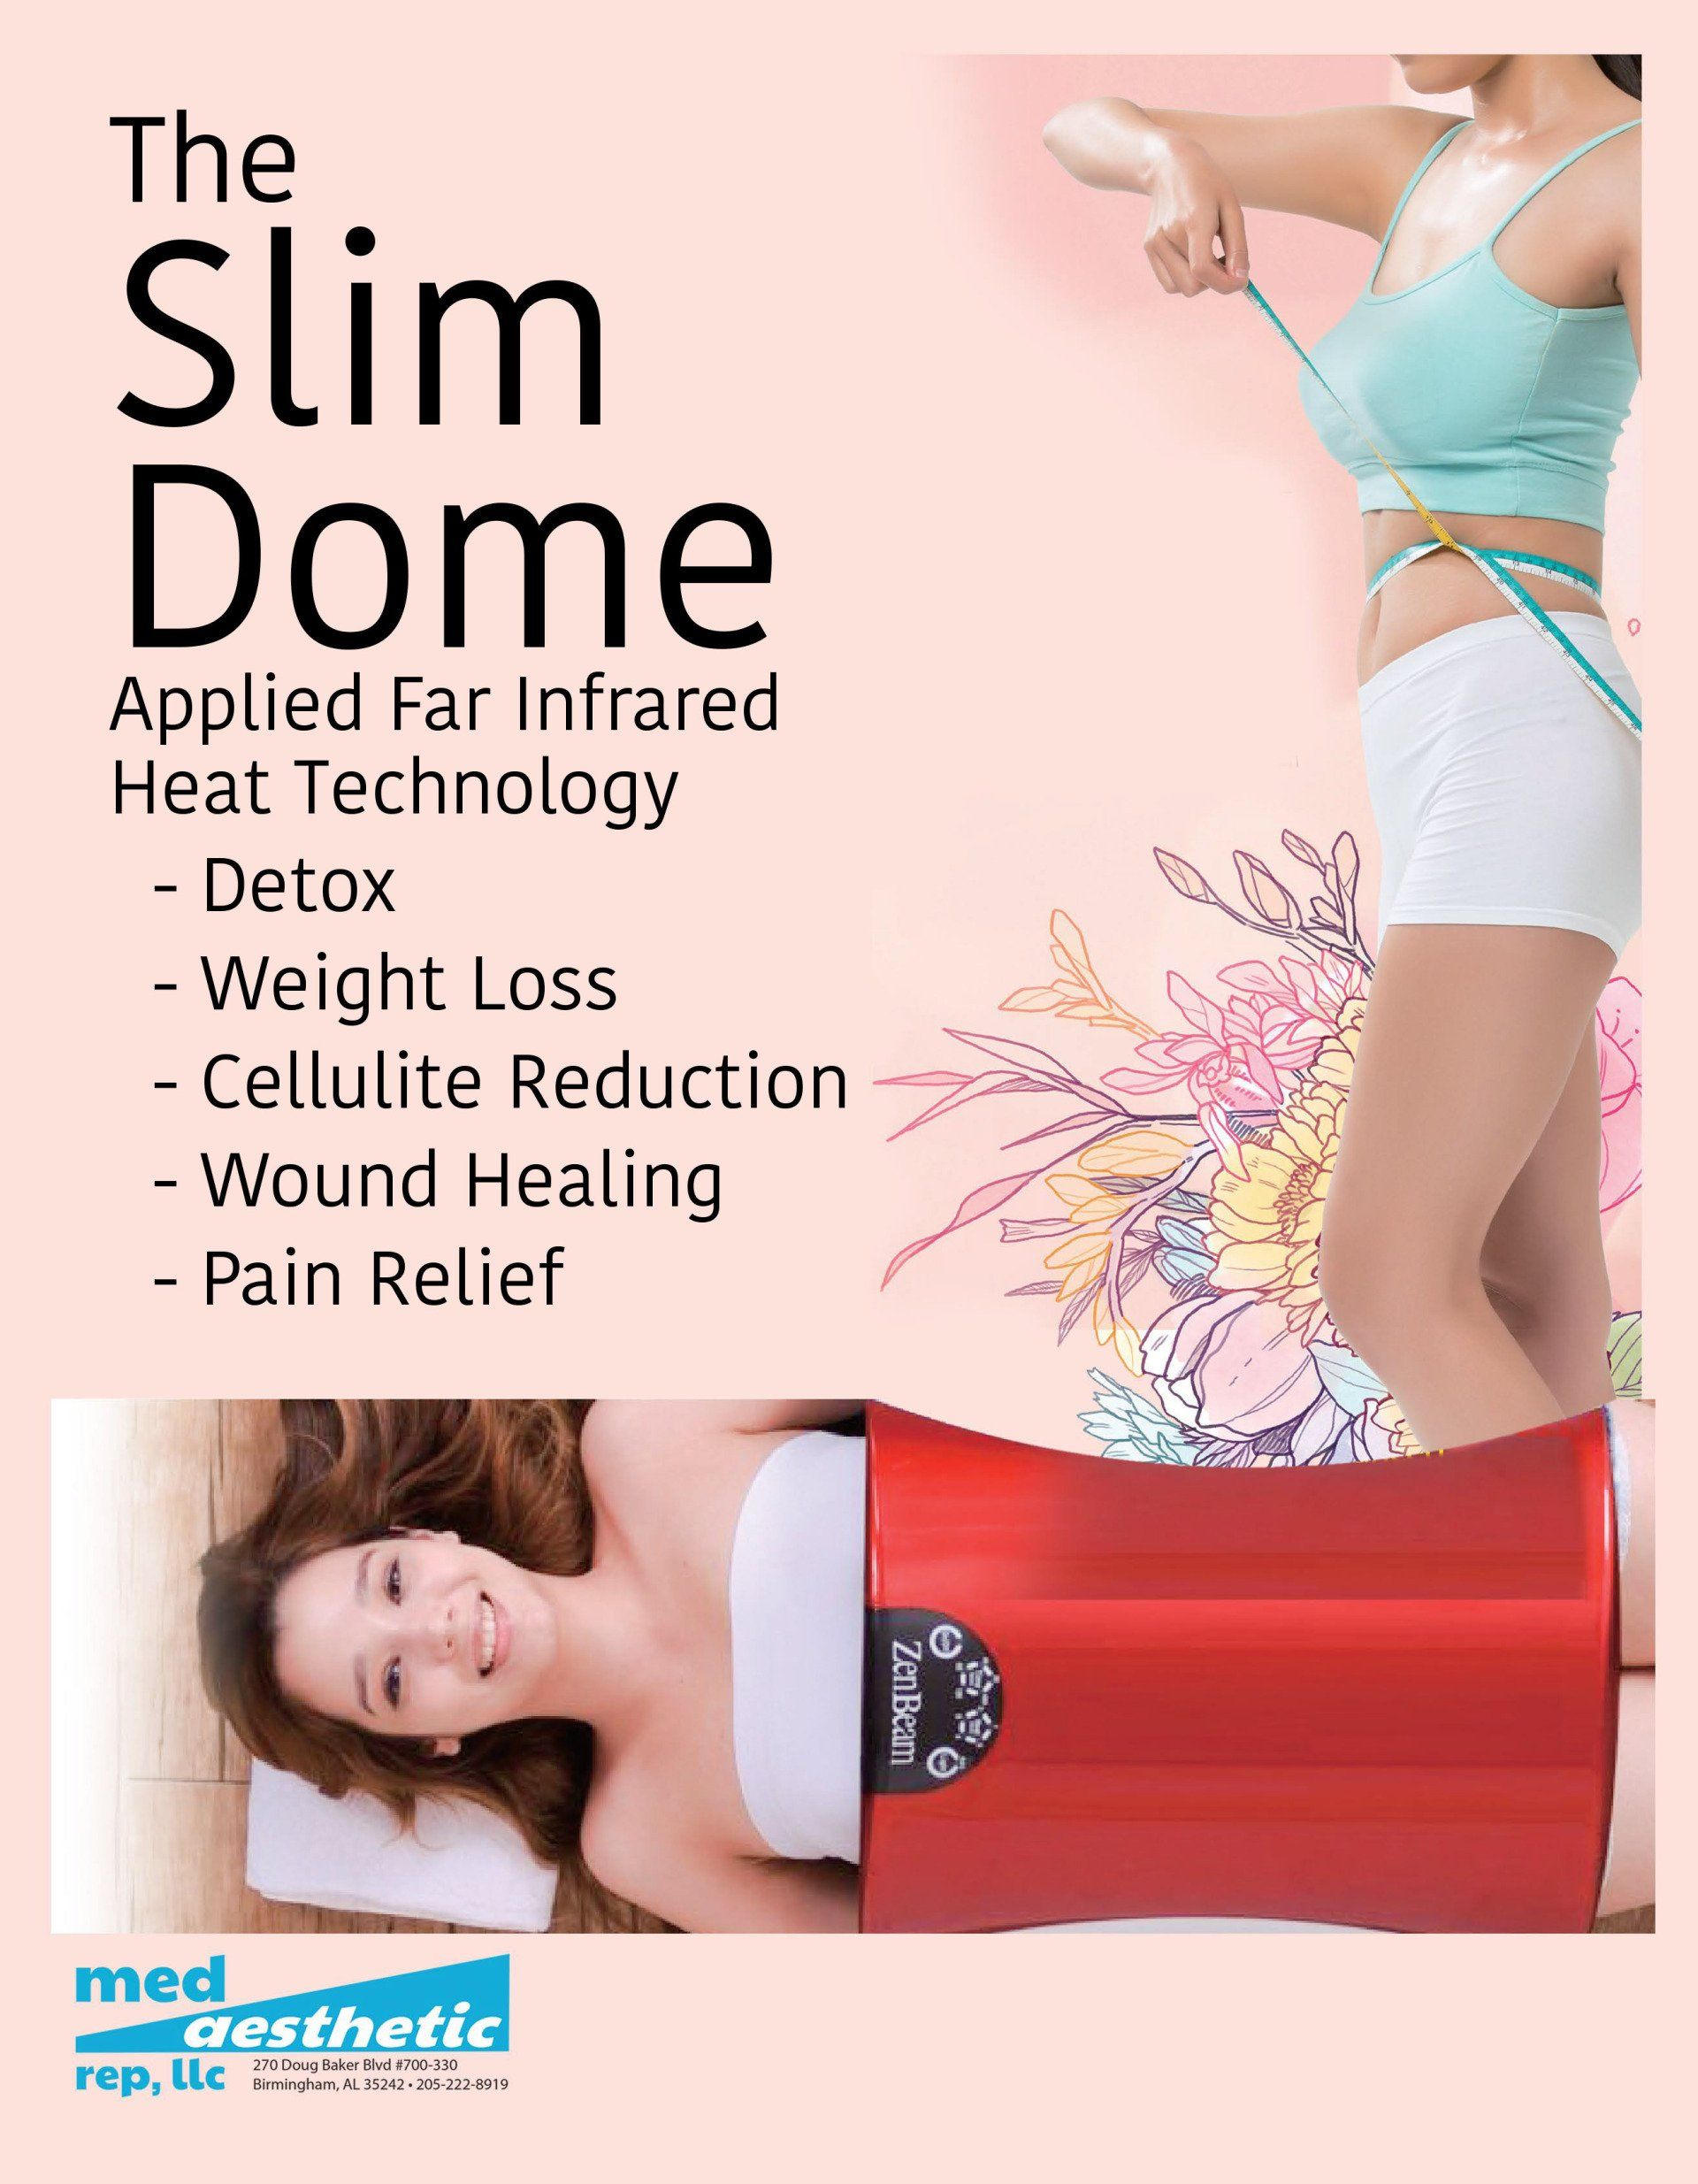 an ad for the slim dome shows a woman measuring her waist